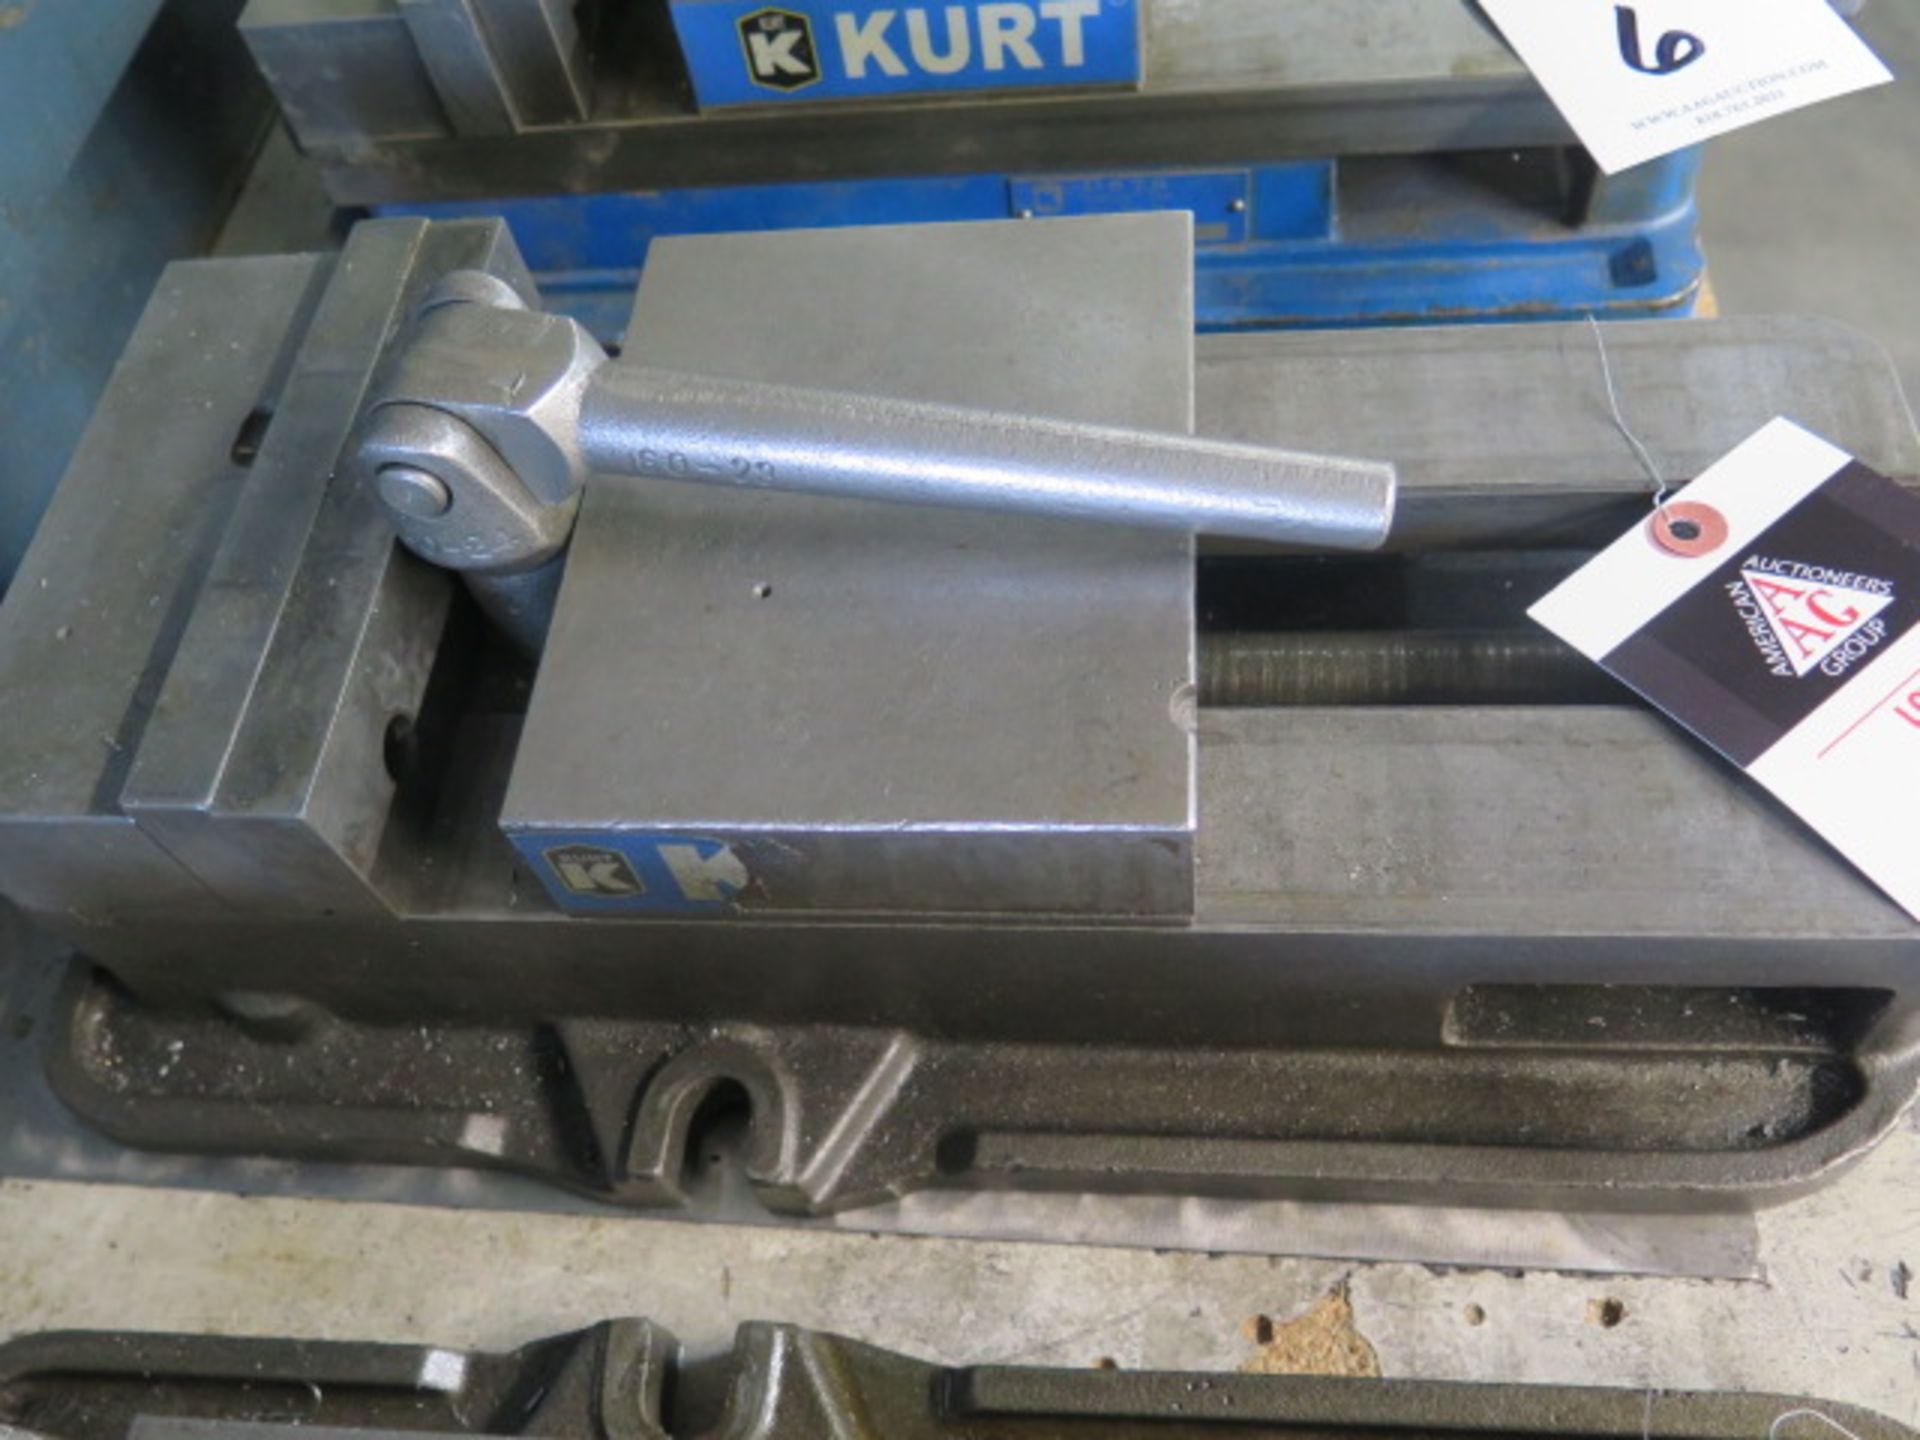 Kurt 6" Angle-Lock Vise (SOLD AS-IS - NO WARRANTY) - Image 2 of 4